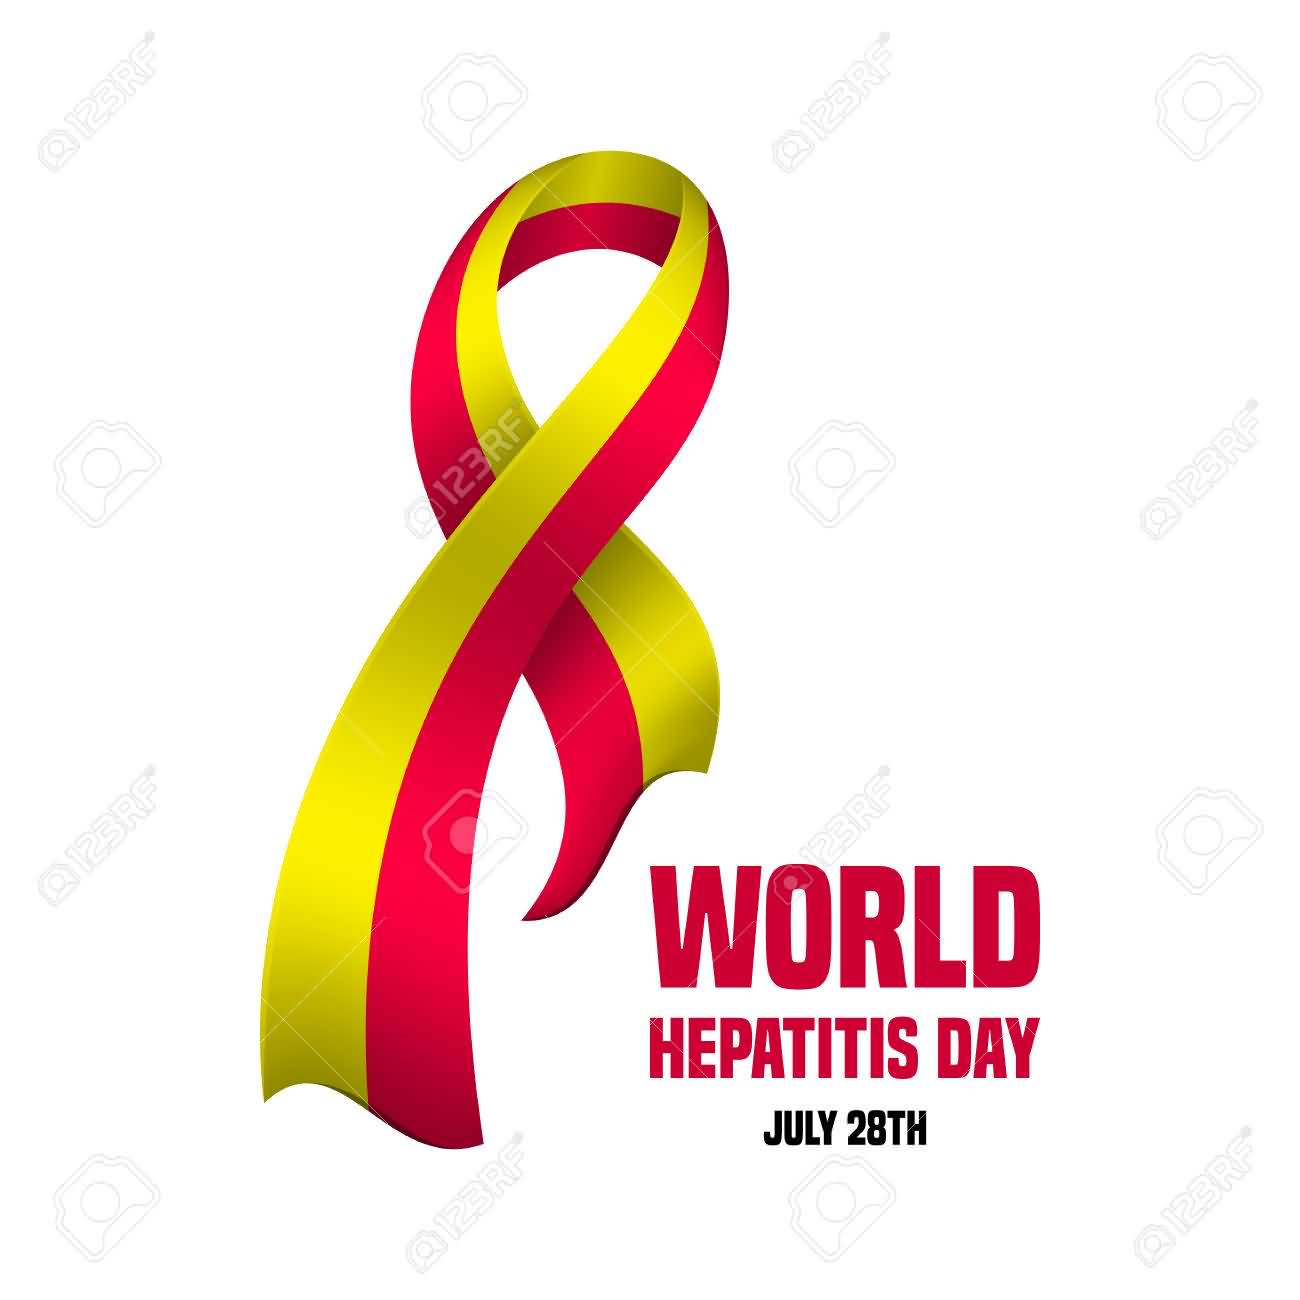 World Hepatitis Day July 28th Pink And Yellow Ribbon Design